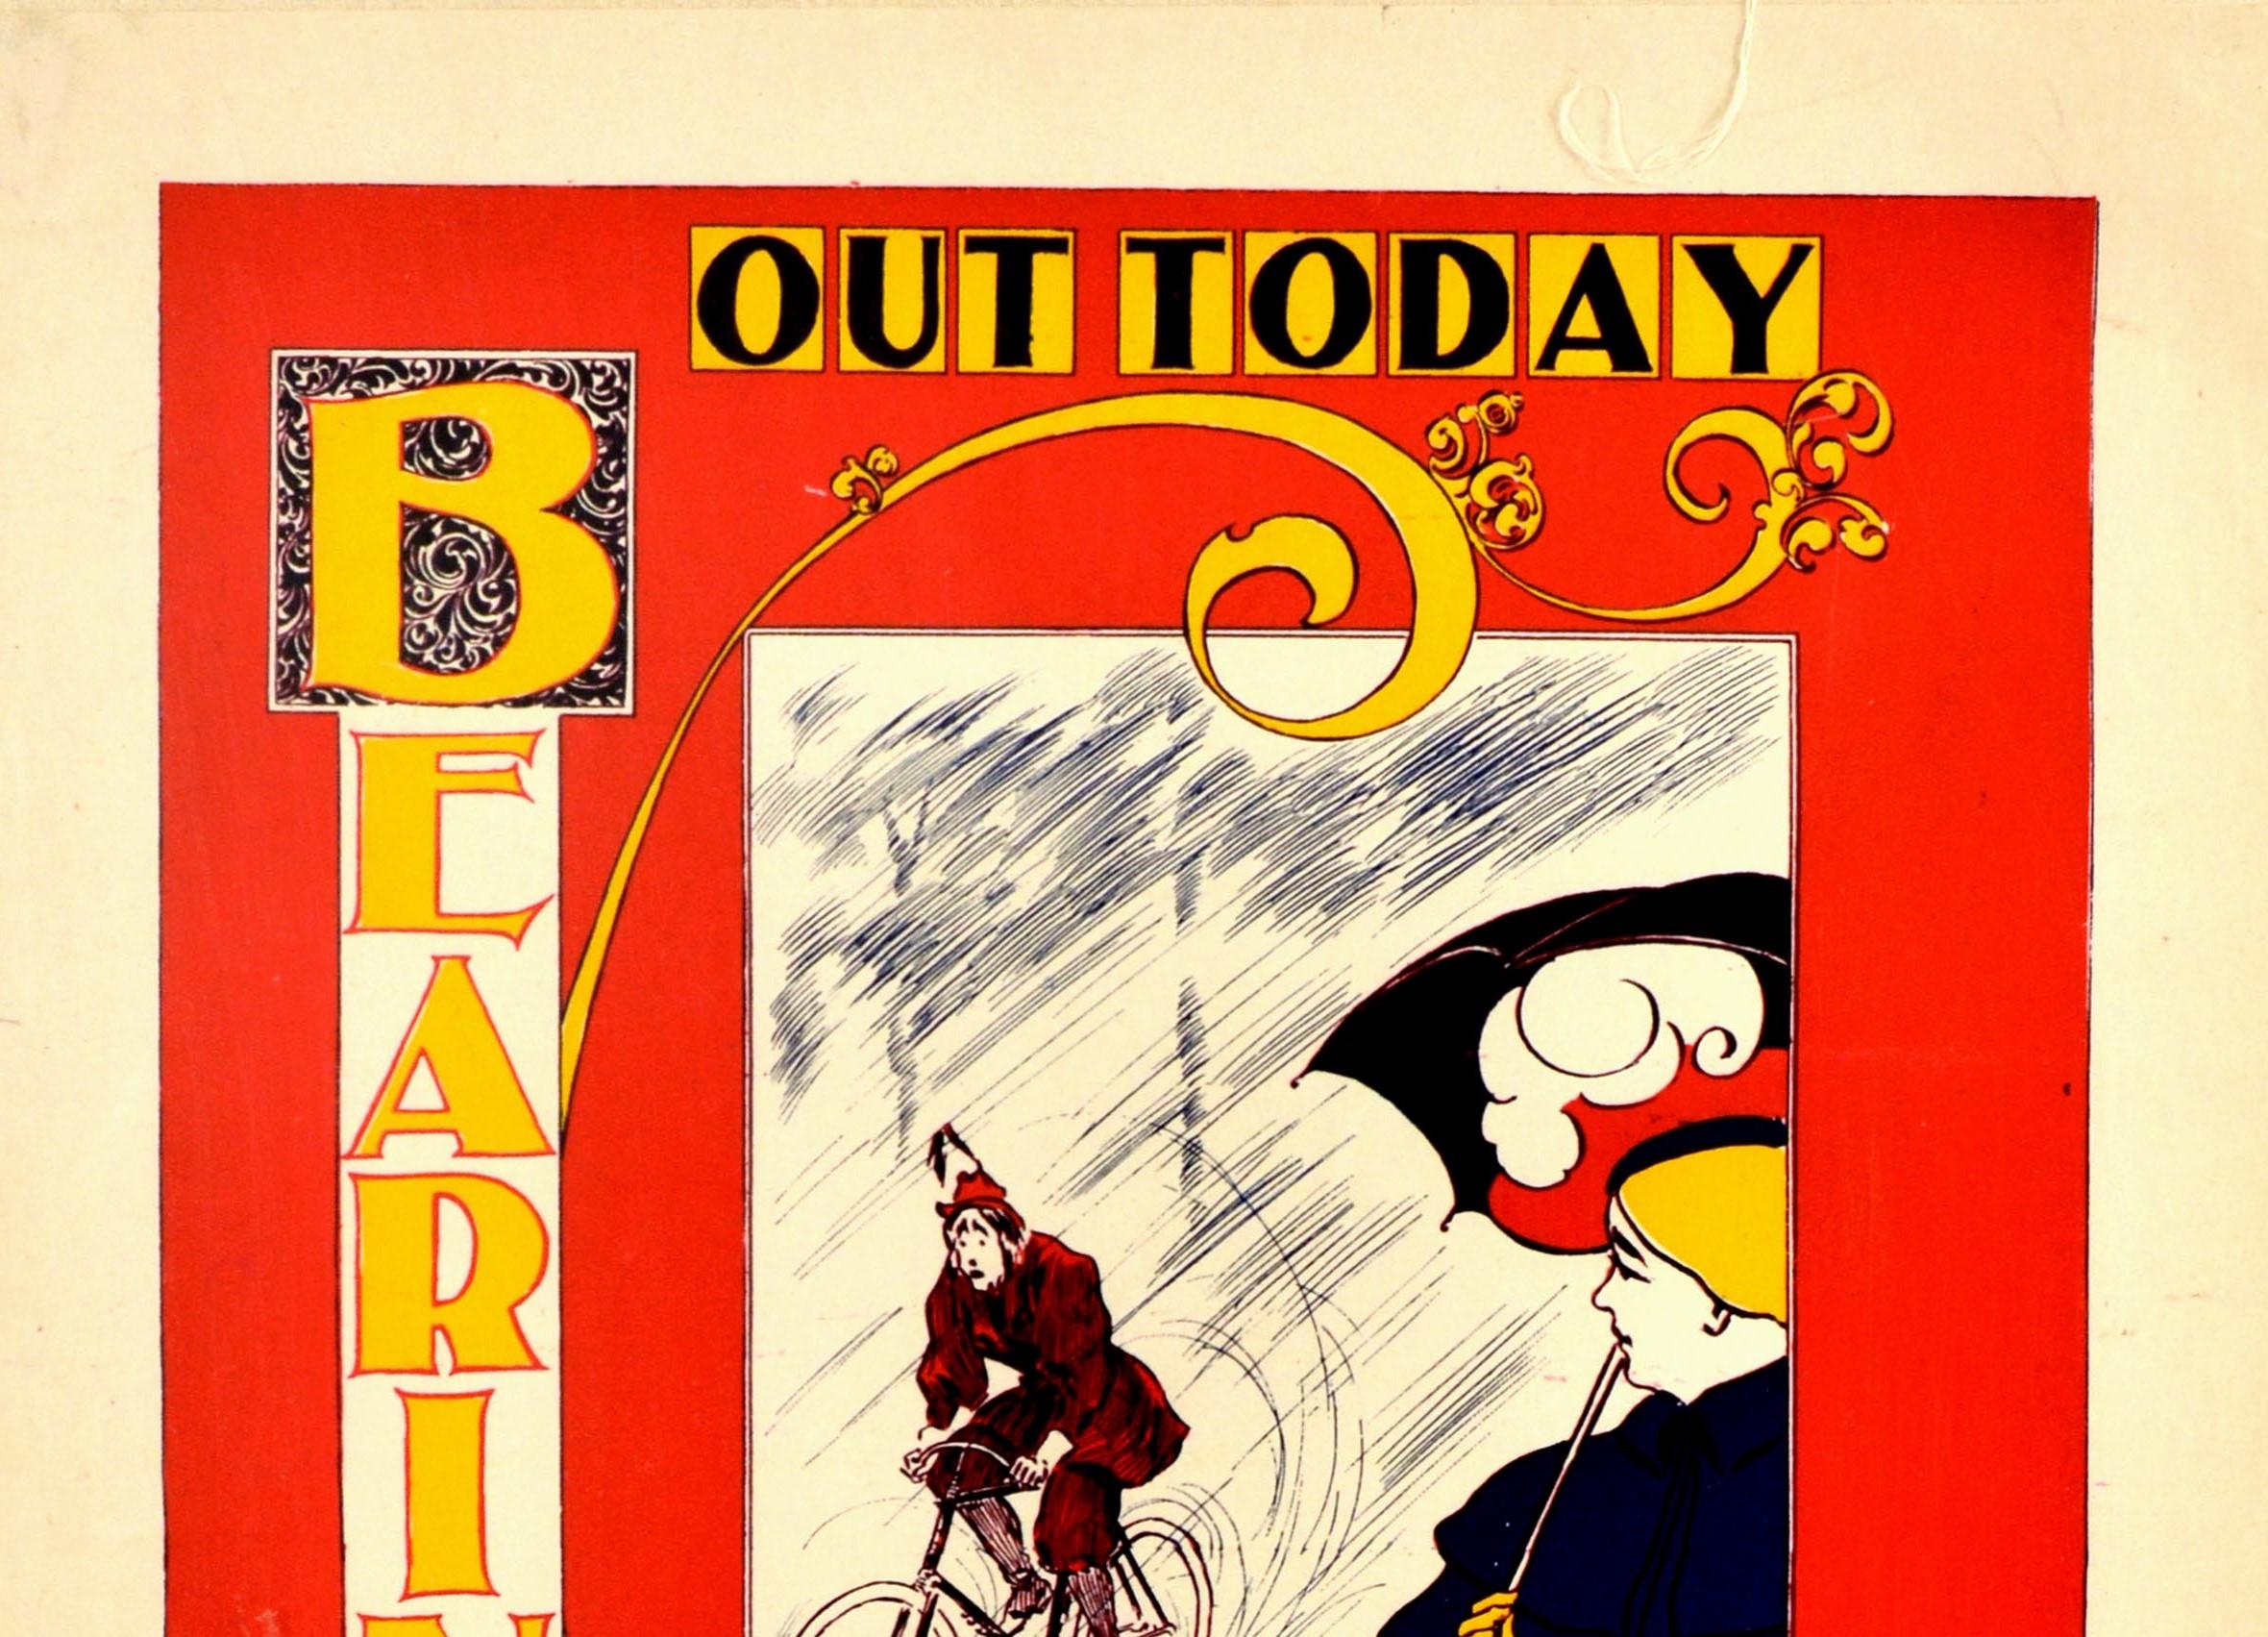 Original Antique Poster Bearings US Cycling Magazine Art Nouveau Design Cyclist - Print by Charles A. Cox